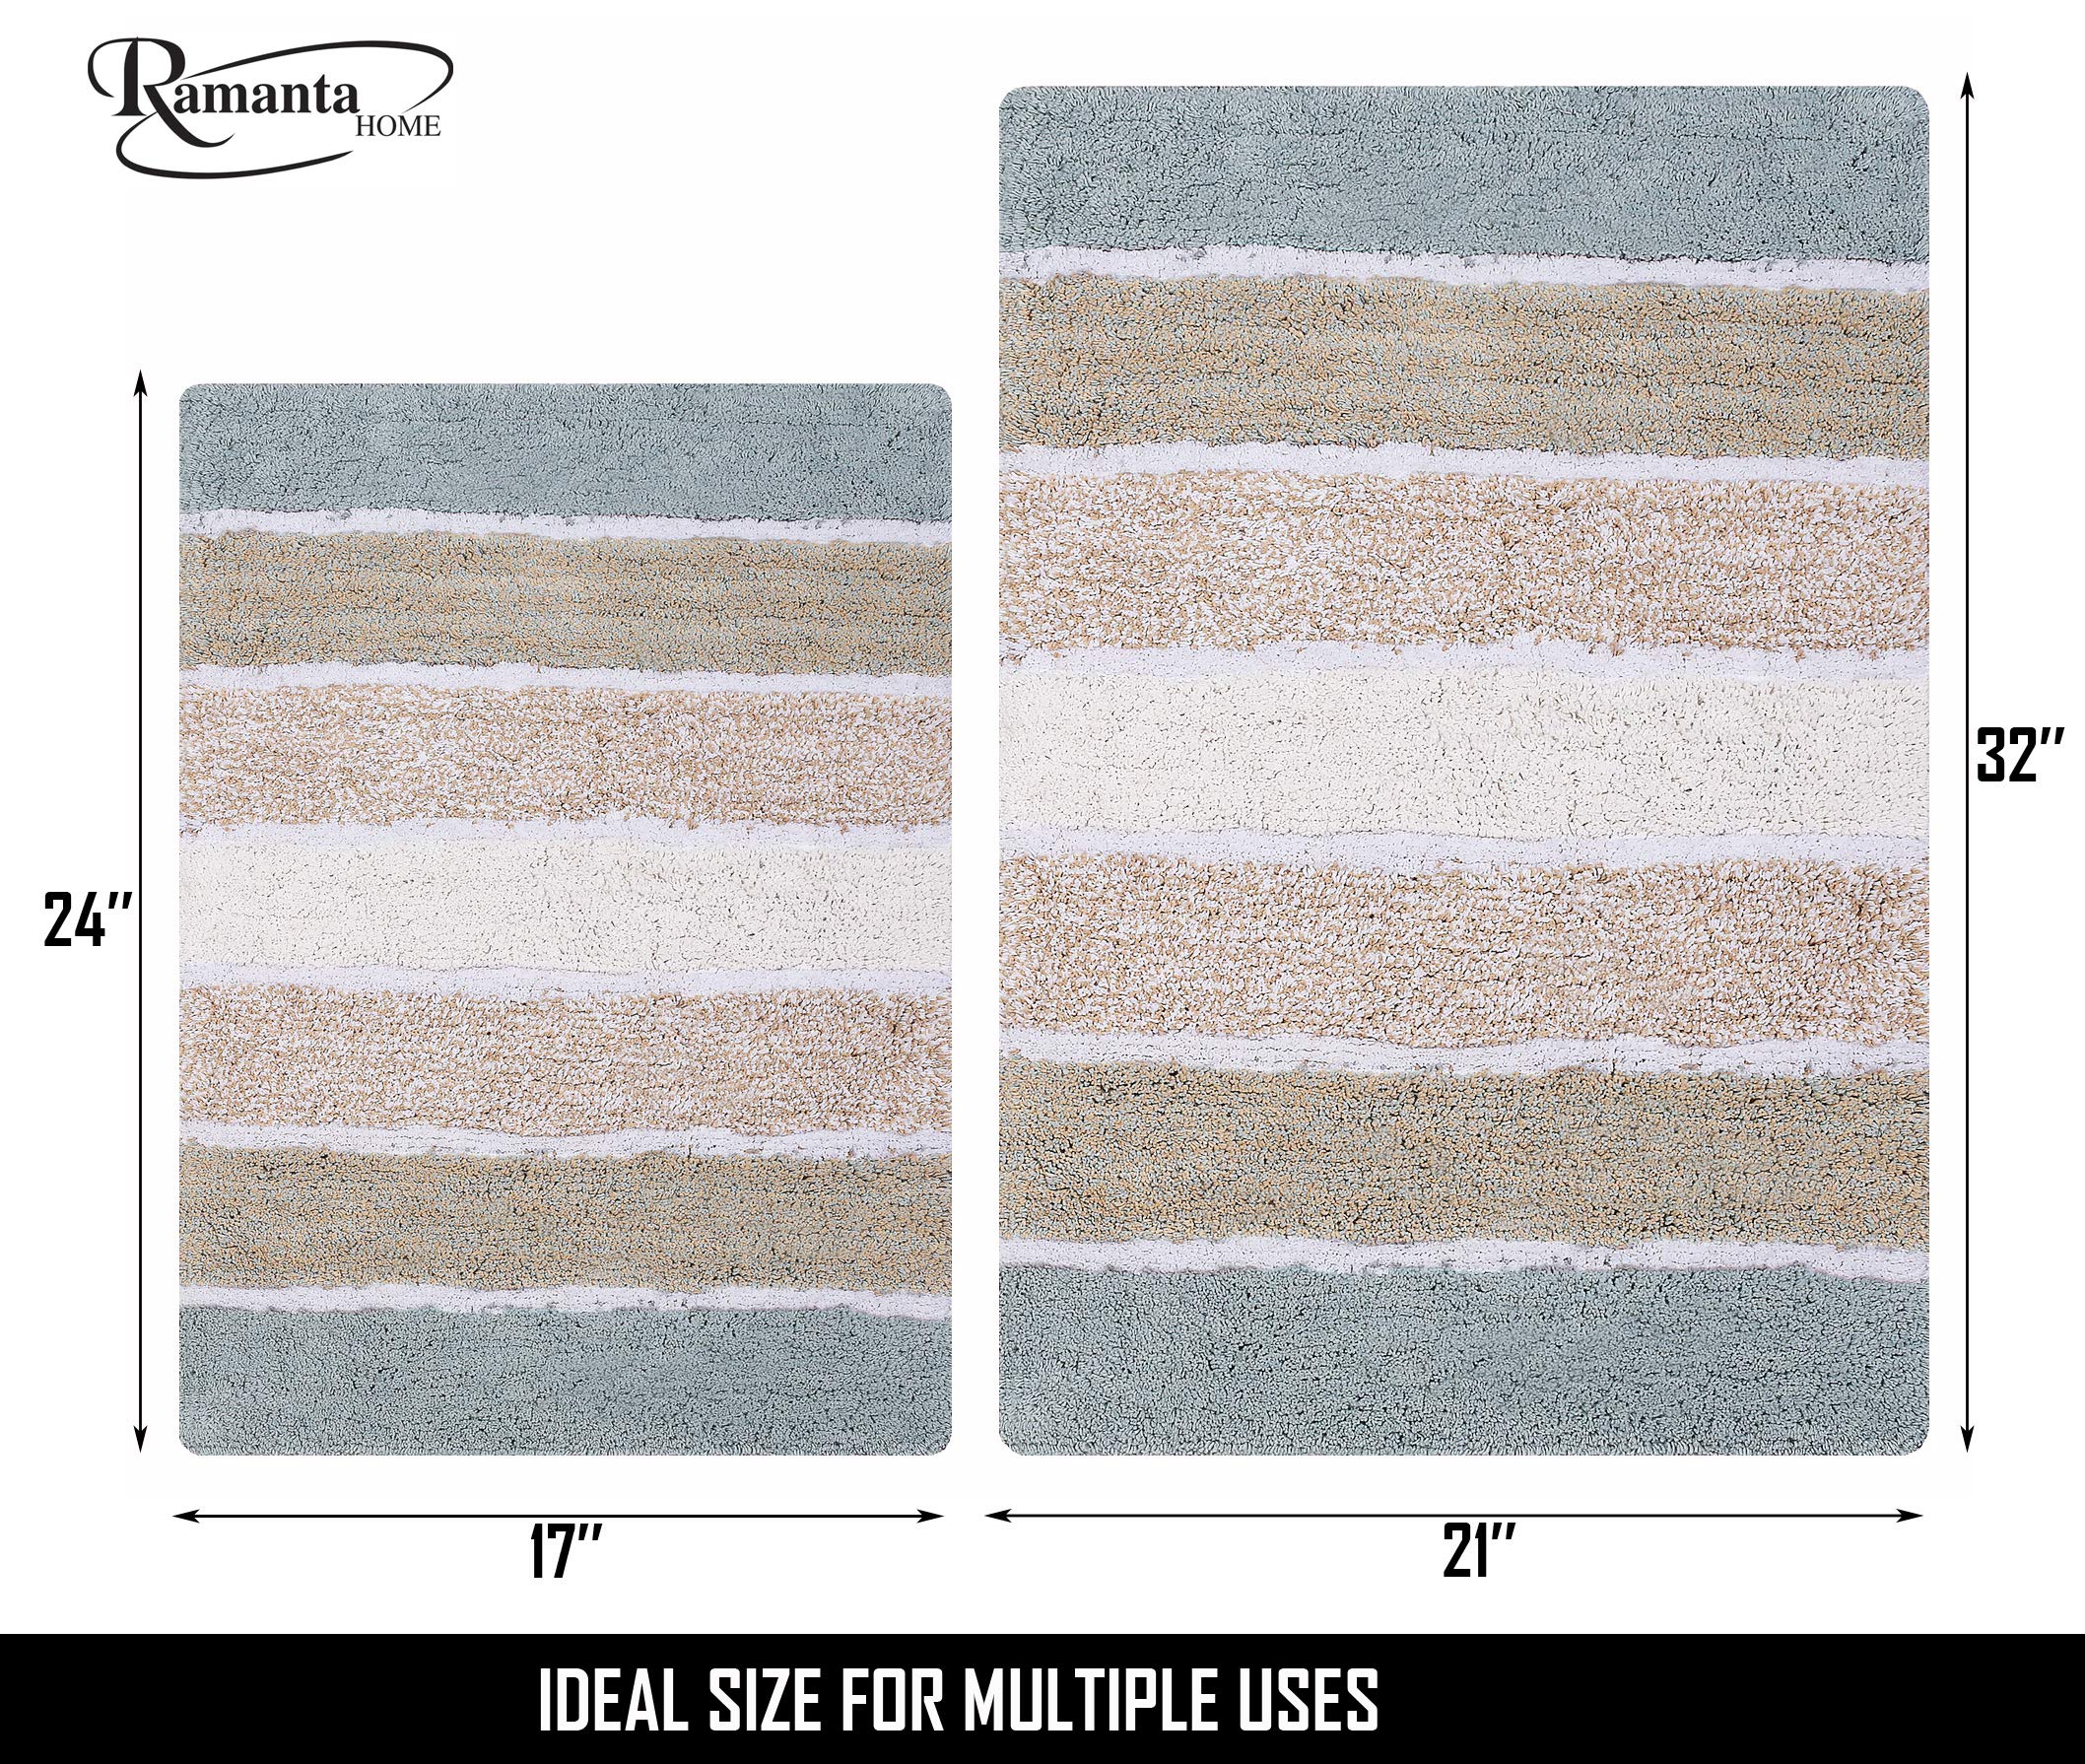 Quilted Stripe Luxury Bath Rug Set of 2, Mat Set, Soft Plush Anti-Skid Shower Rug +Toilet Mat.Quilted Rugs, Super Absorbent mats, Machine Washable Bath Mat,Size 21x32-17x24 Spa Grey-Beige